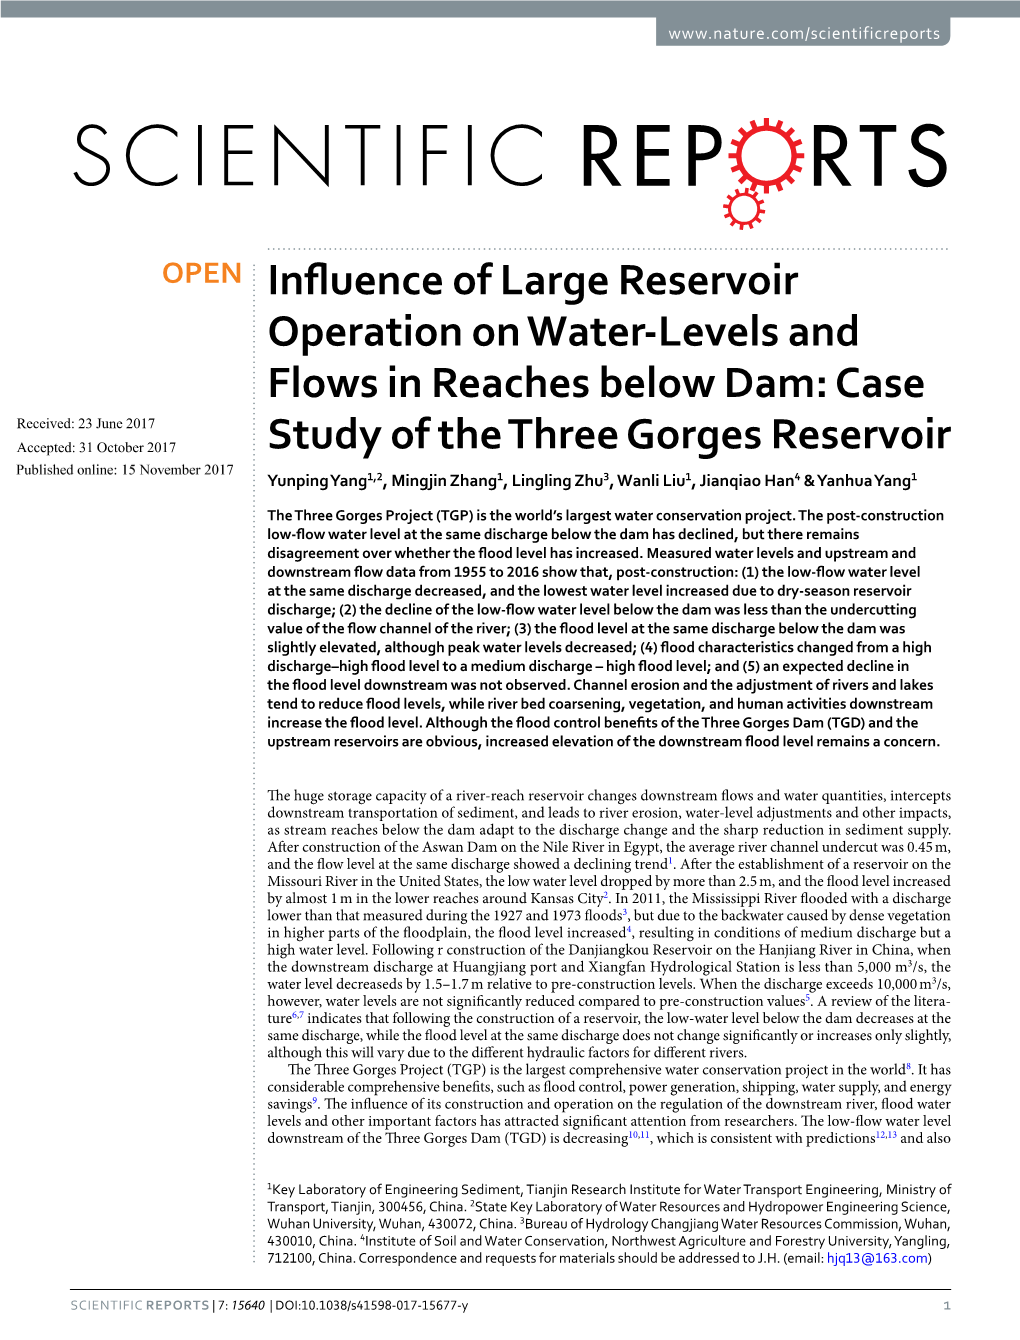 Influence of Large Reservoir Operation on Water-Levels